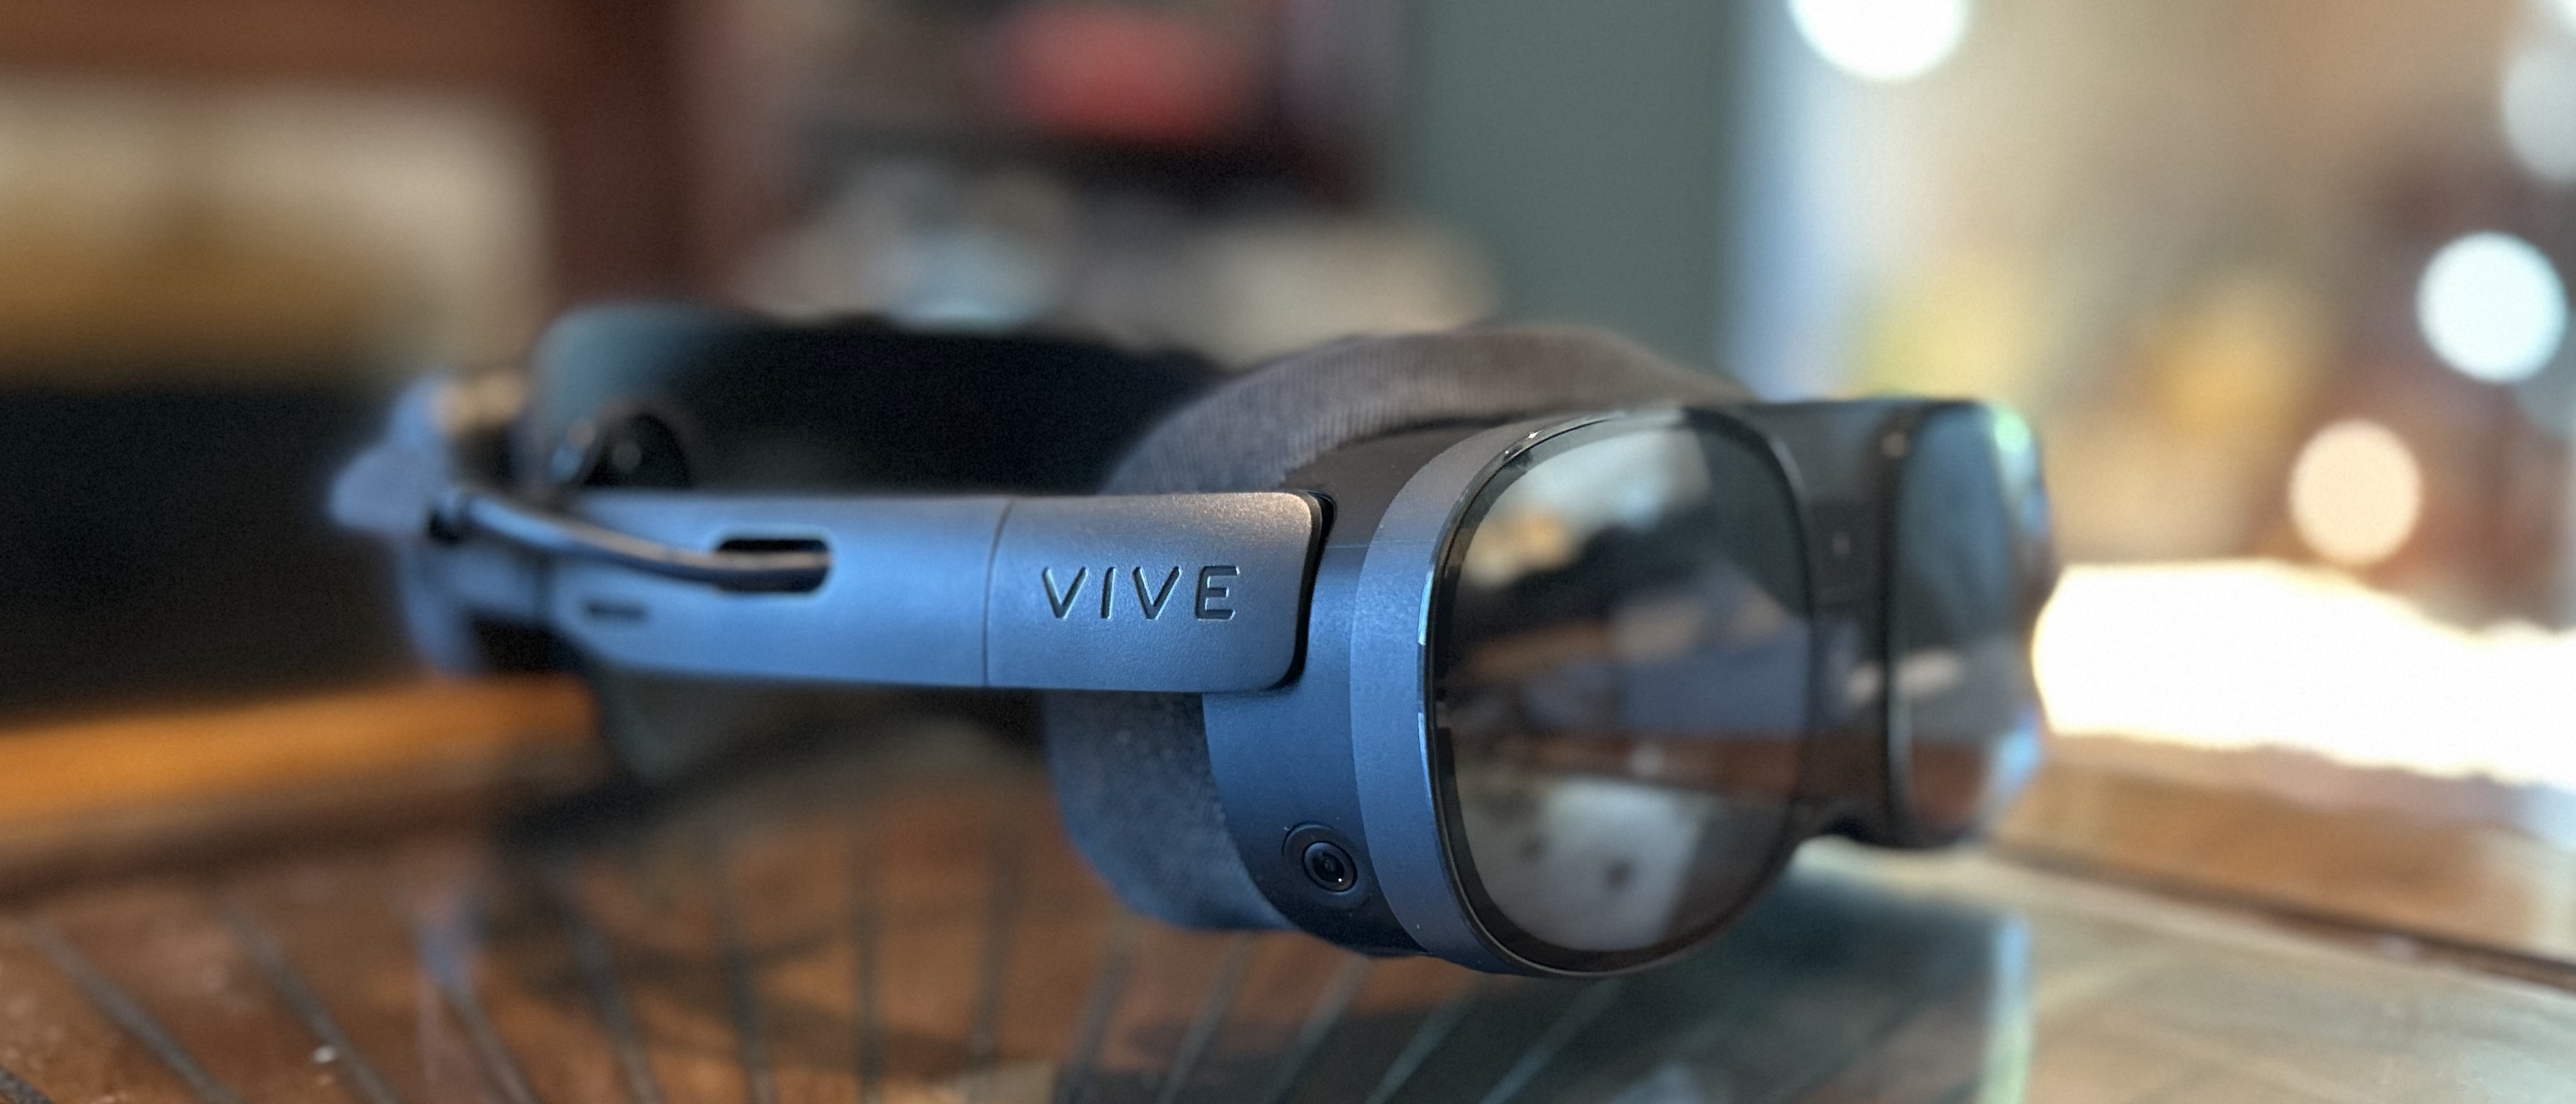 Vive XR Elite Hands-on: Lightweight & Compact, But Shares Quest Pro's Woes